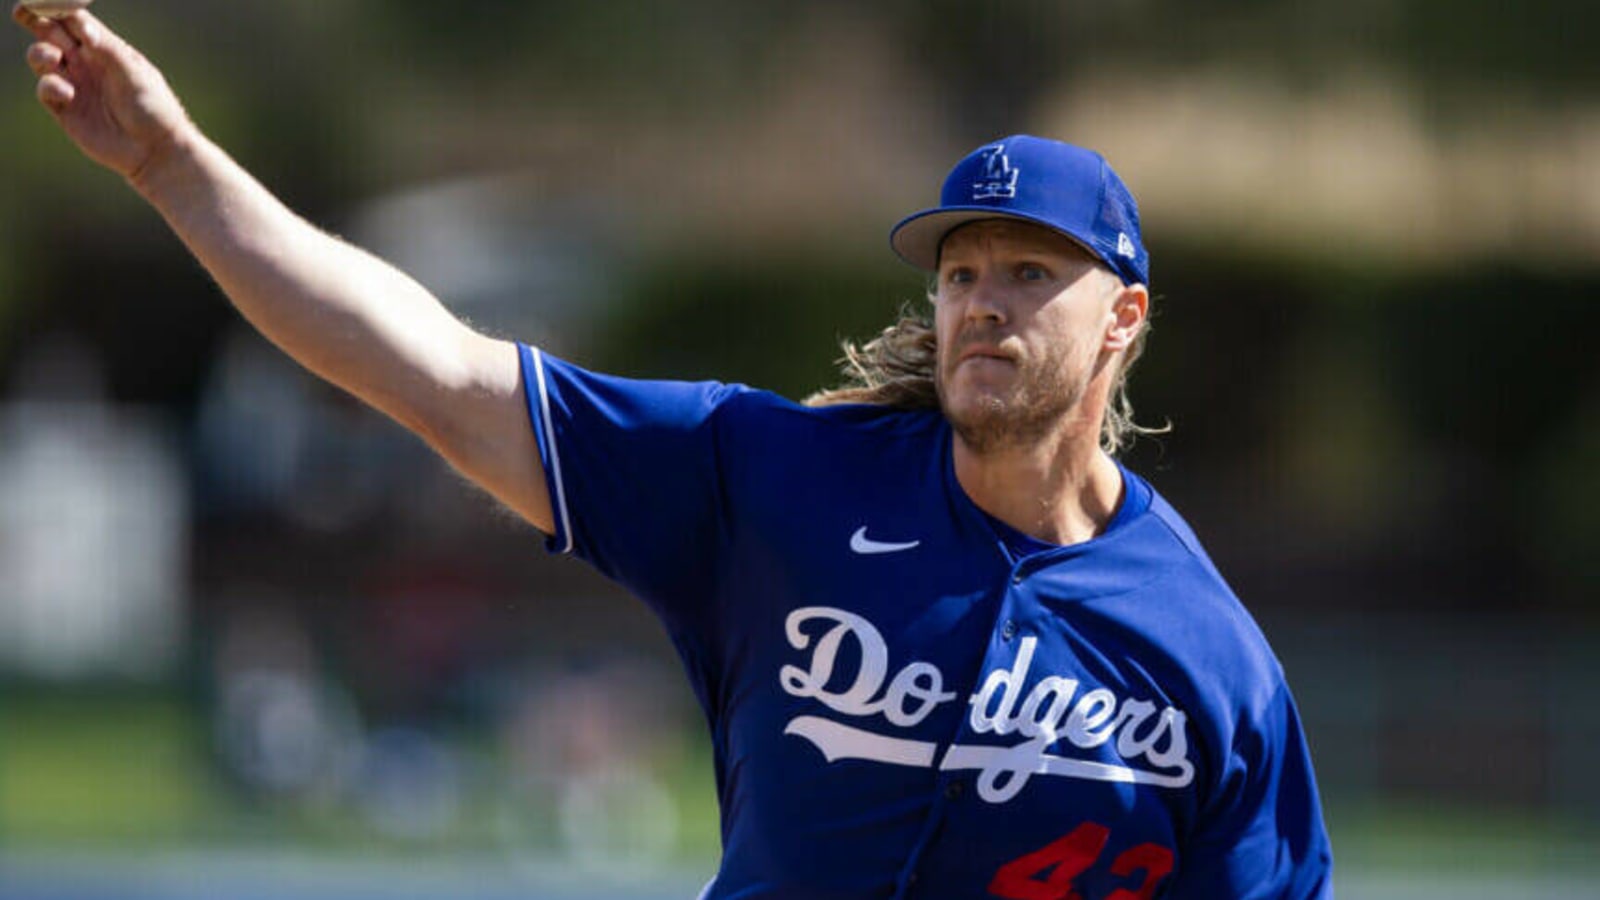 Dodgers Spring Training: Noah Syndergaard ‘More Focused On Delivery’ Than Velocity